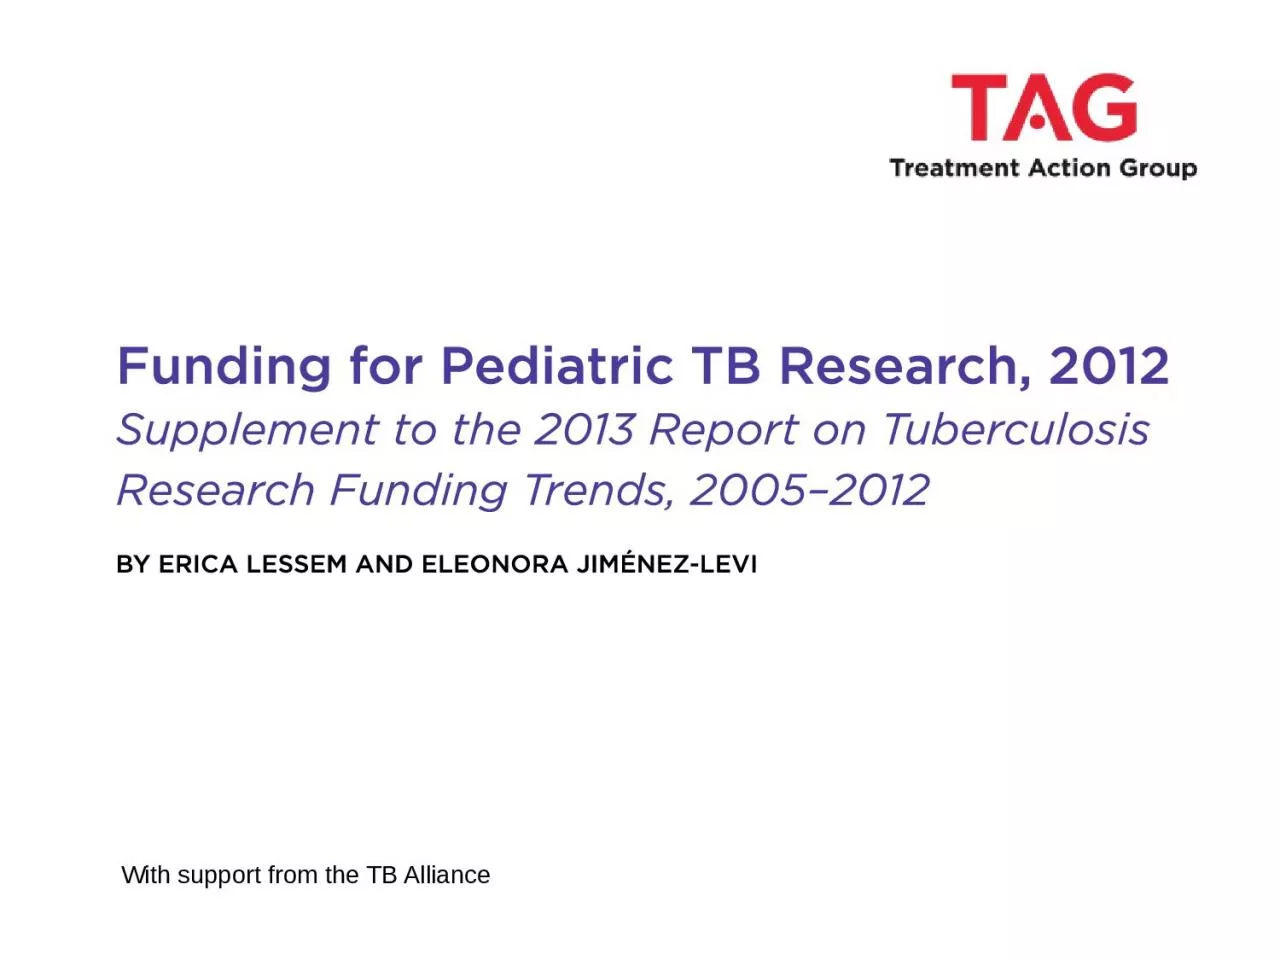 With support from the TB Alliance